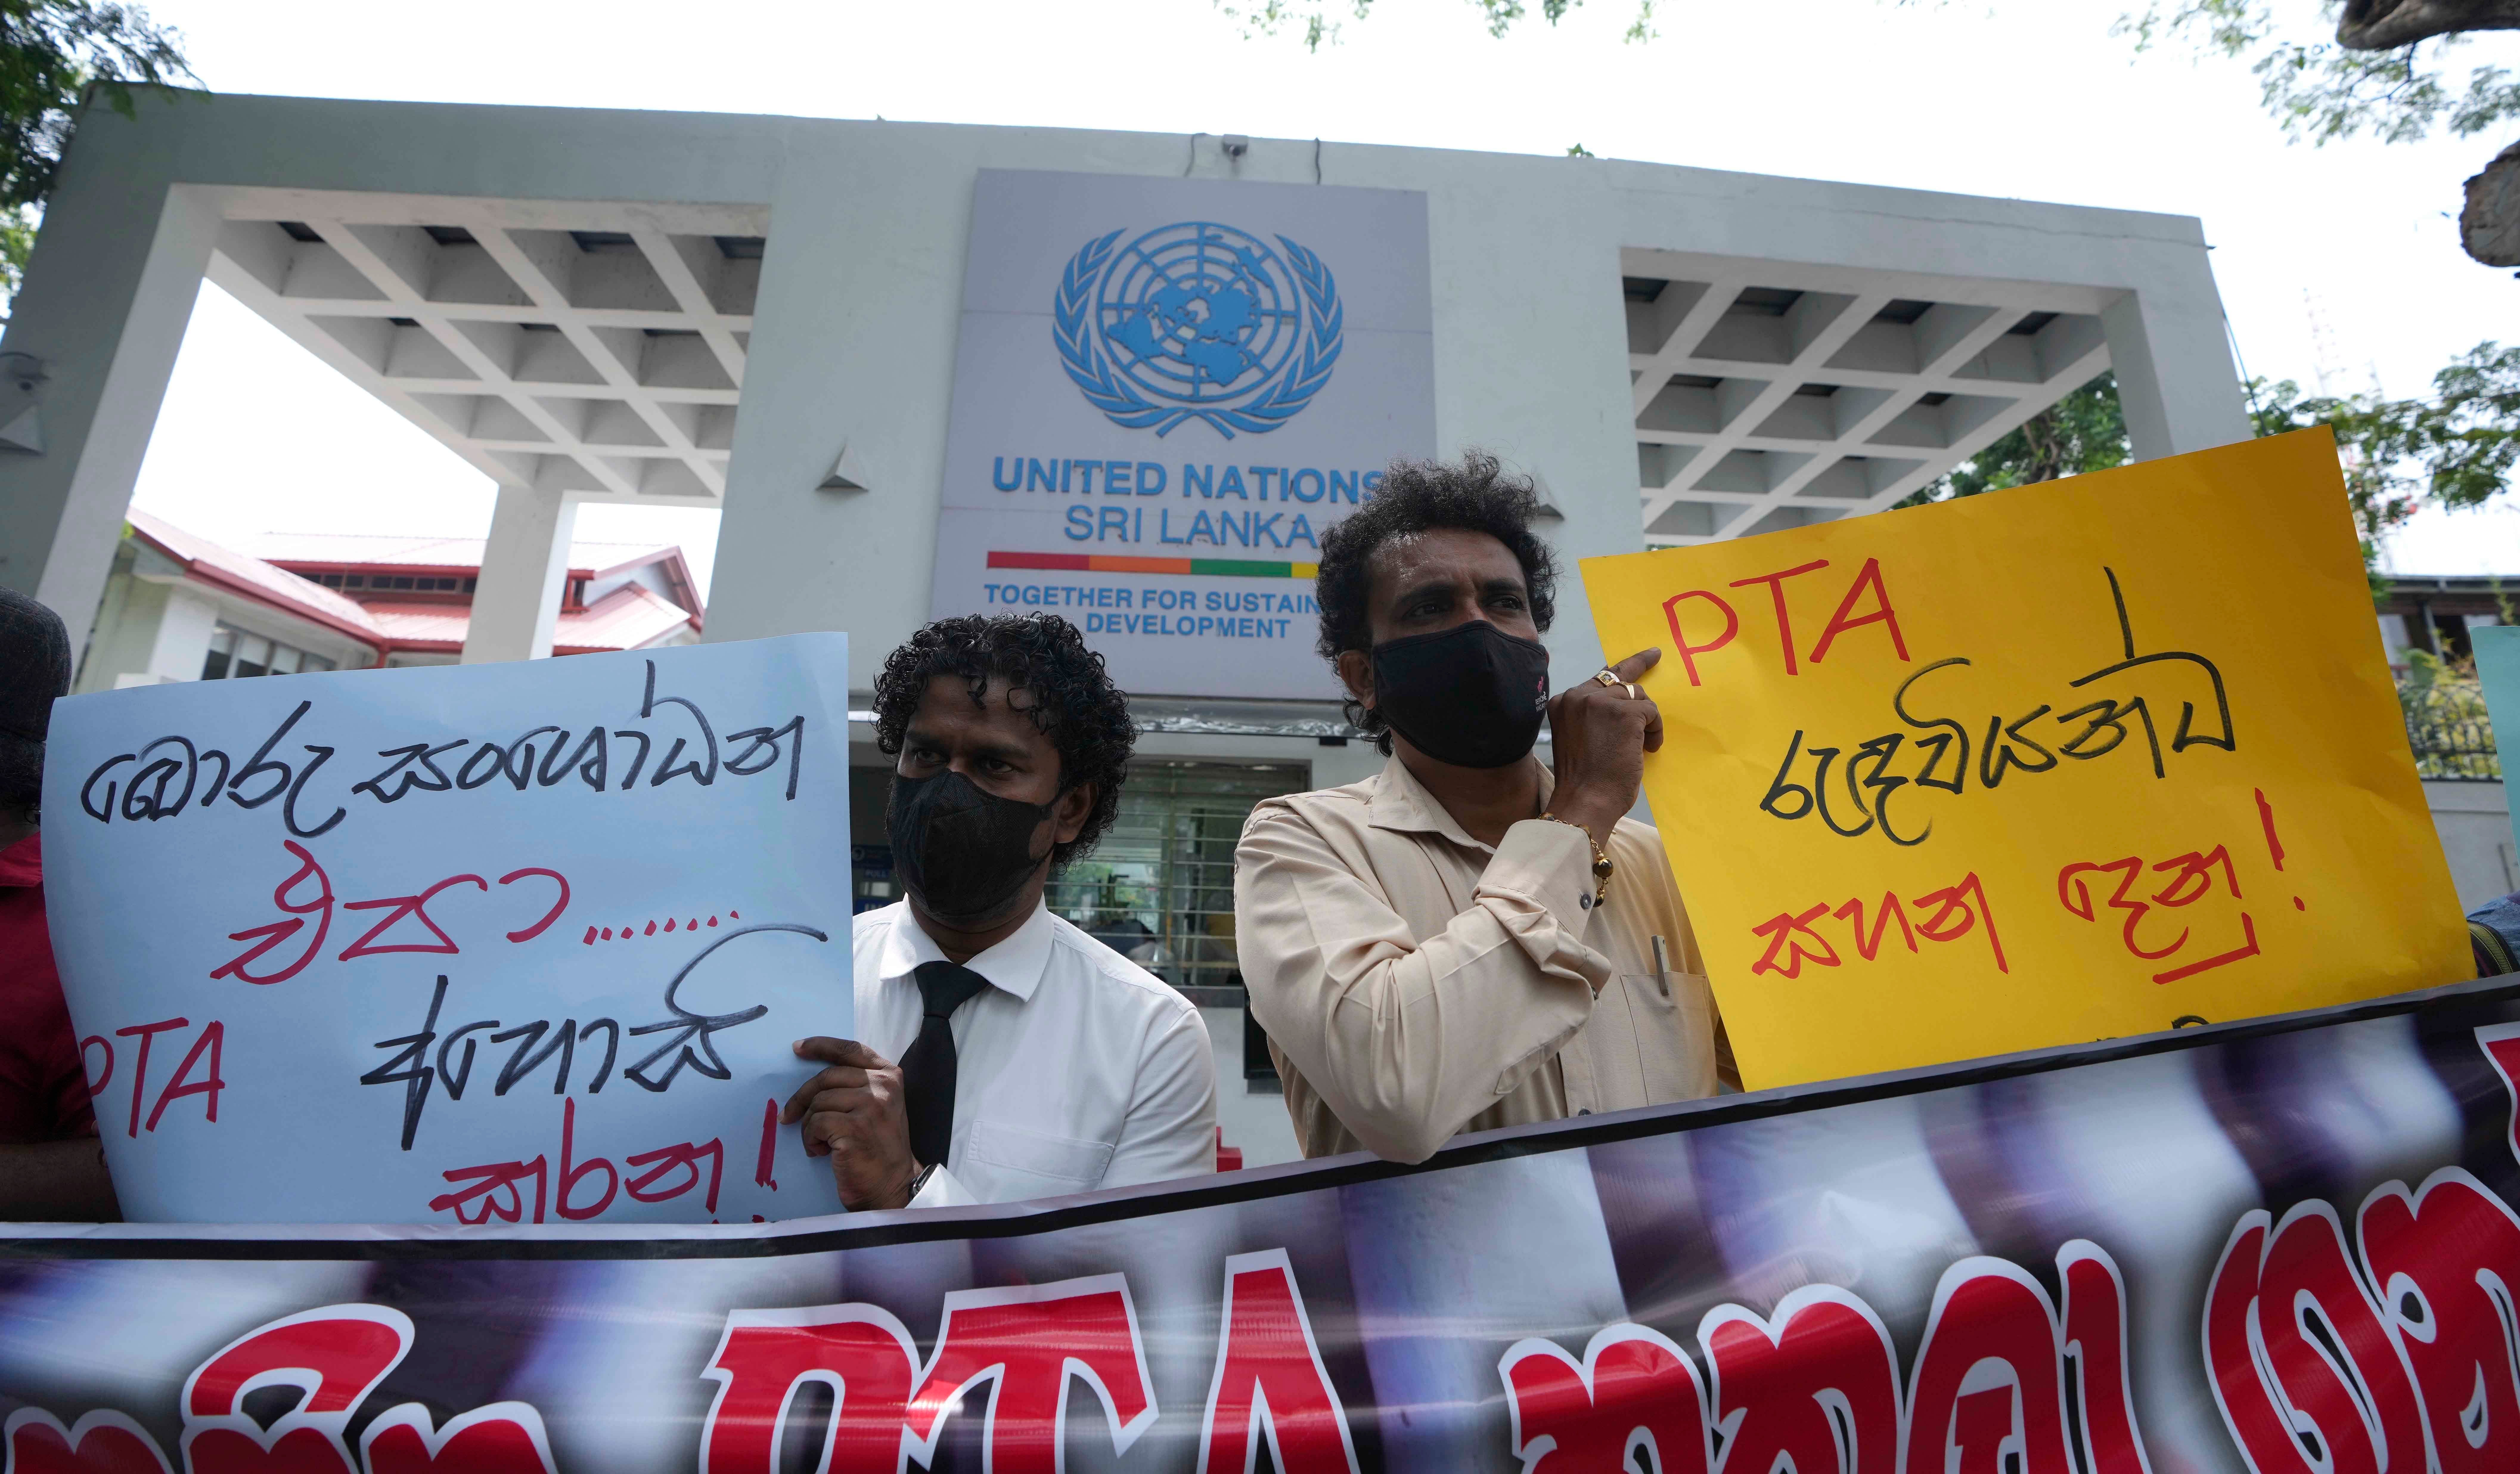 Two people hold protest signs written in Sinhalese 